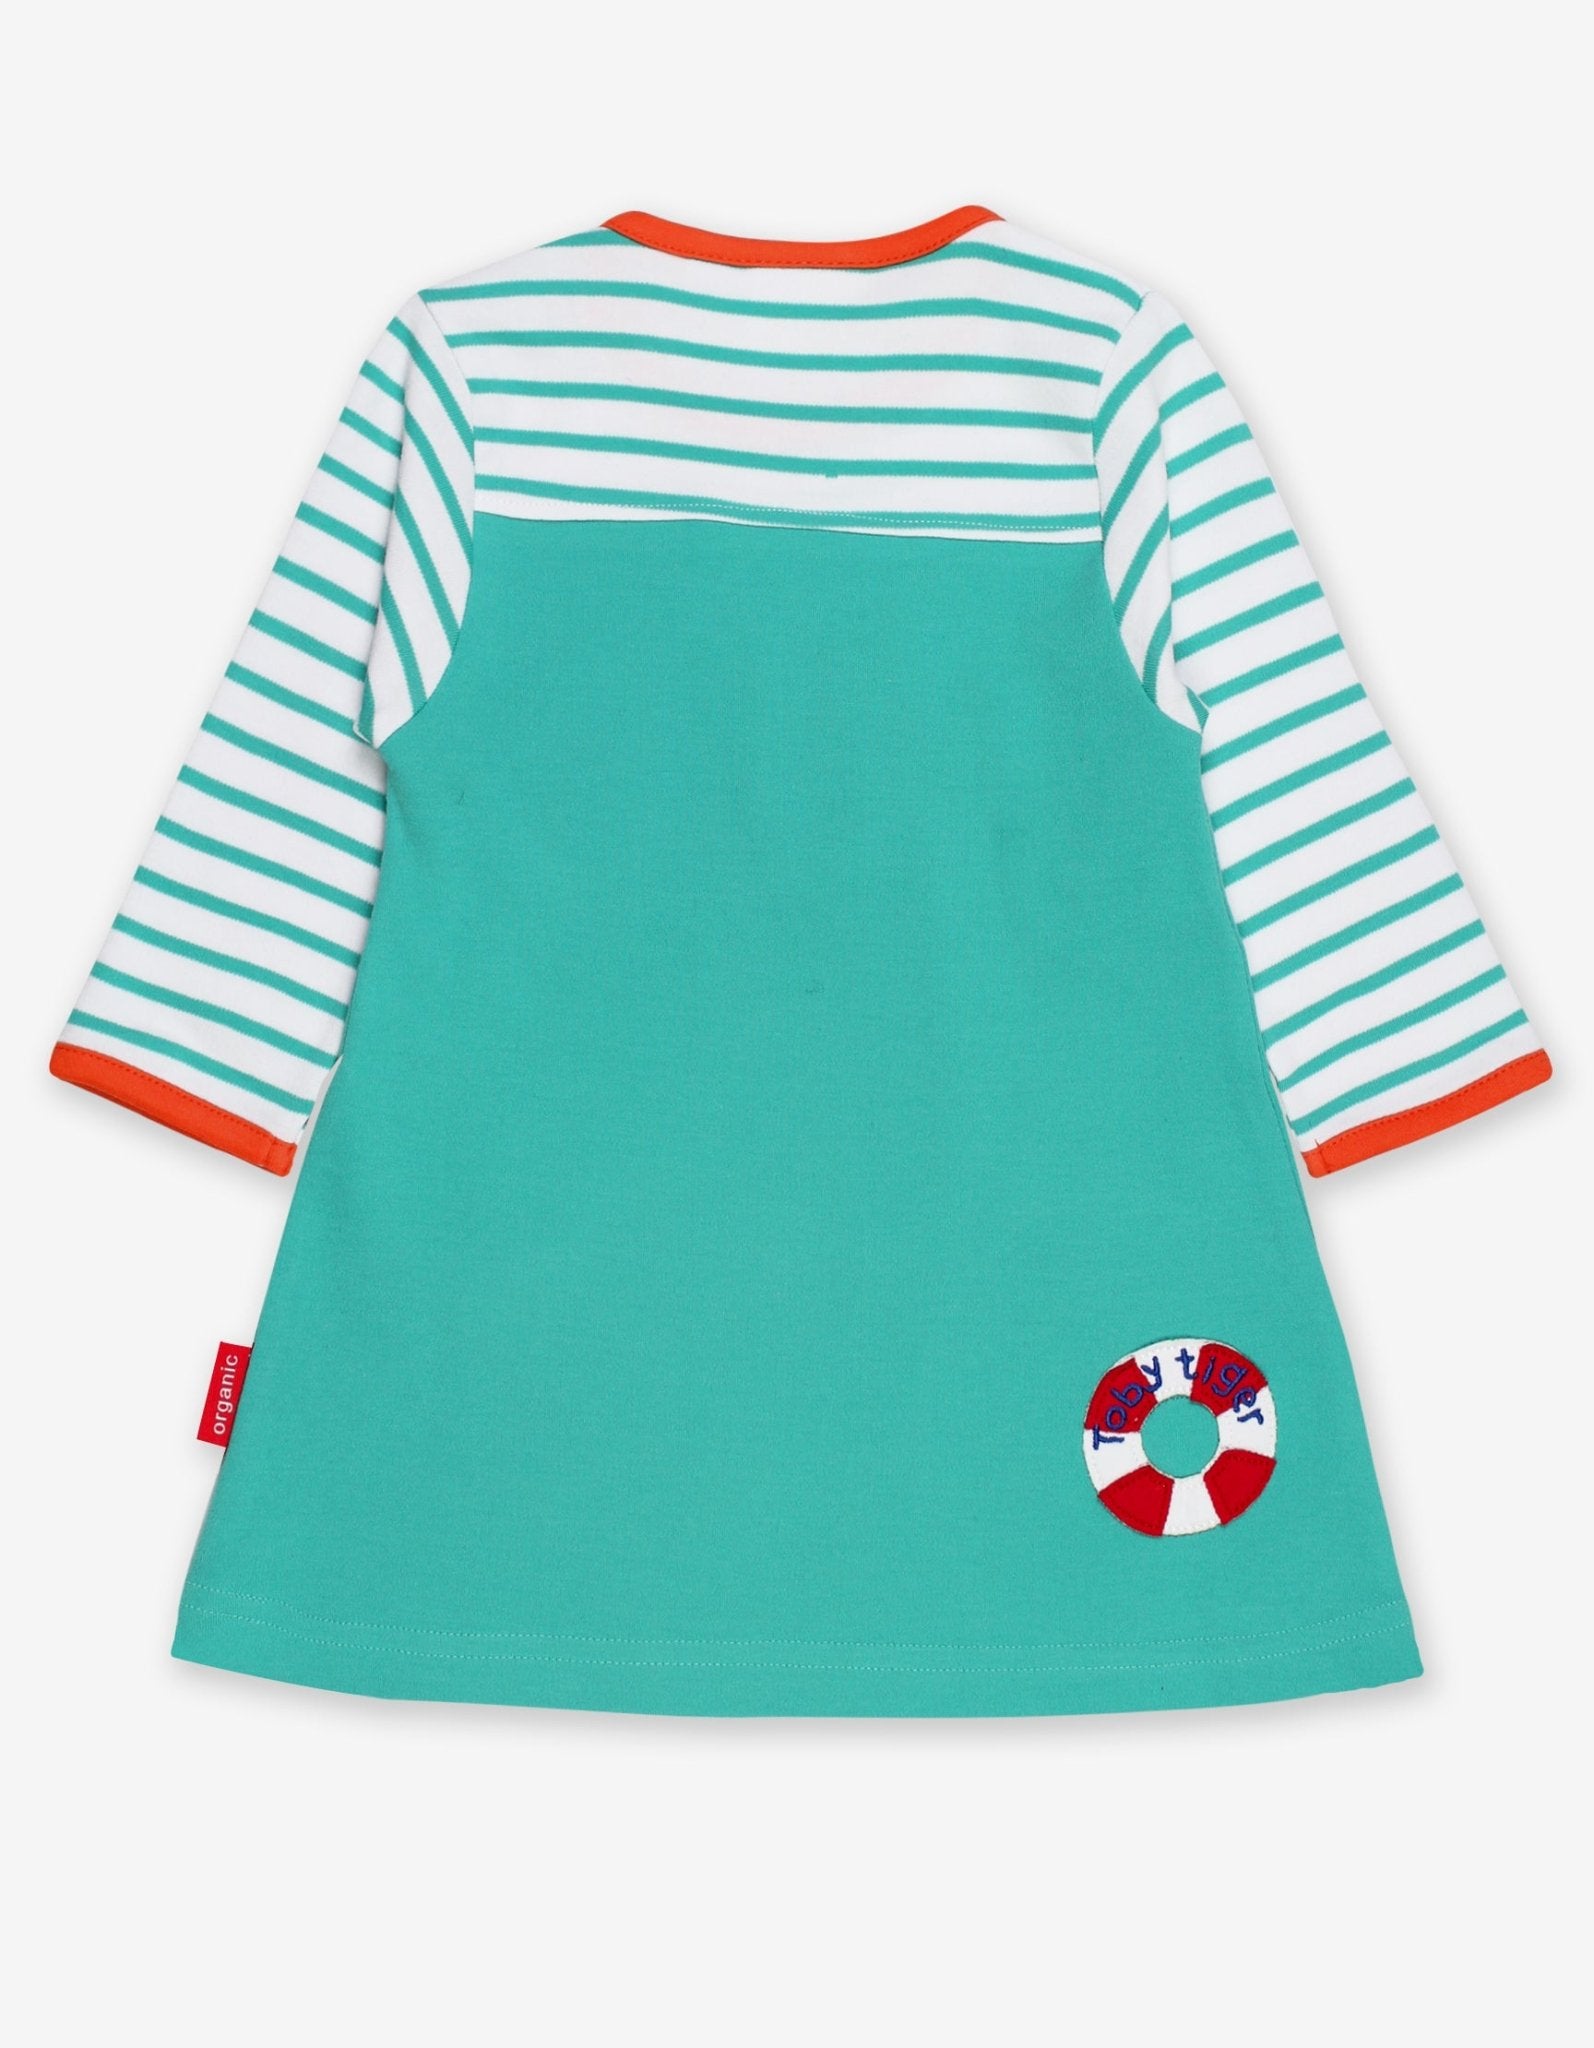 Organic Teal Seagull Applique Dress - Toby Tiger